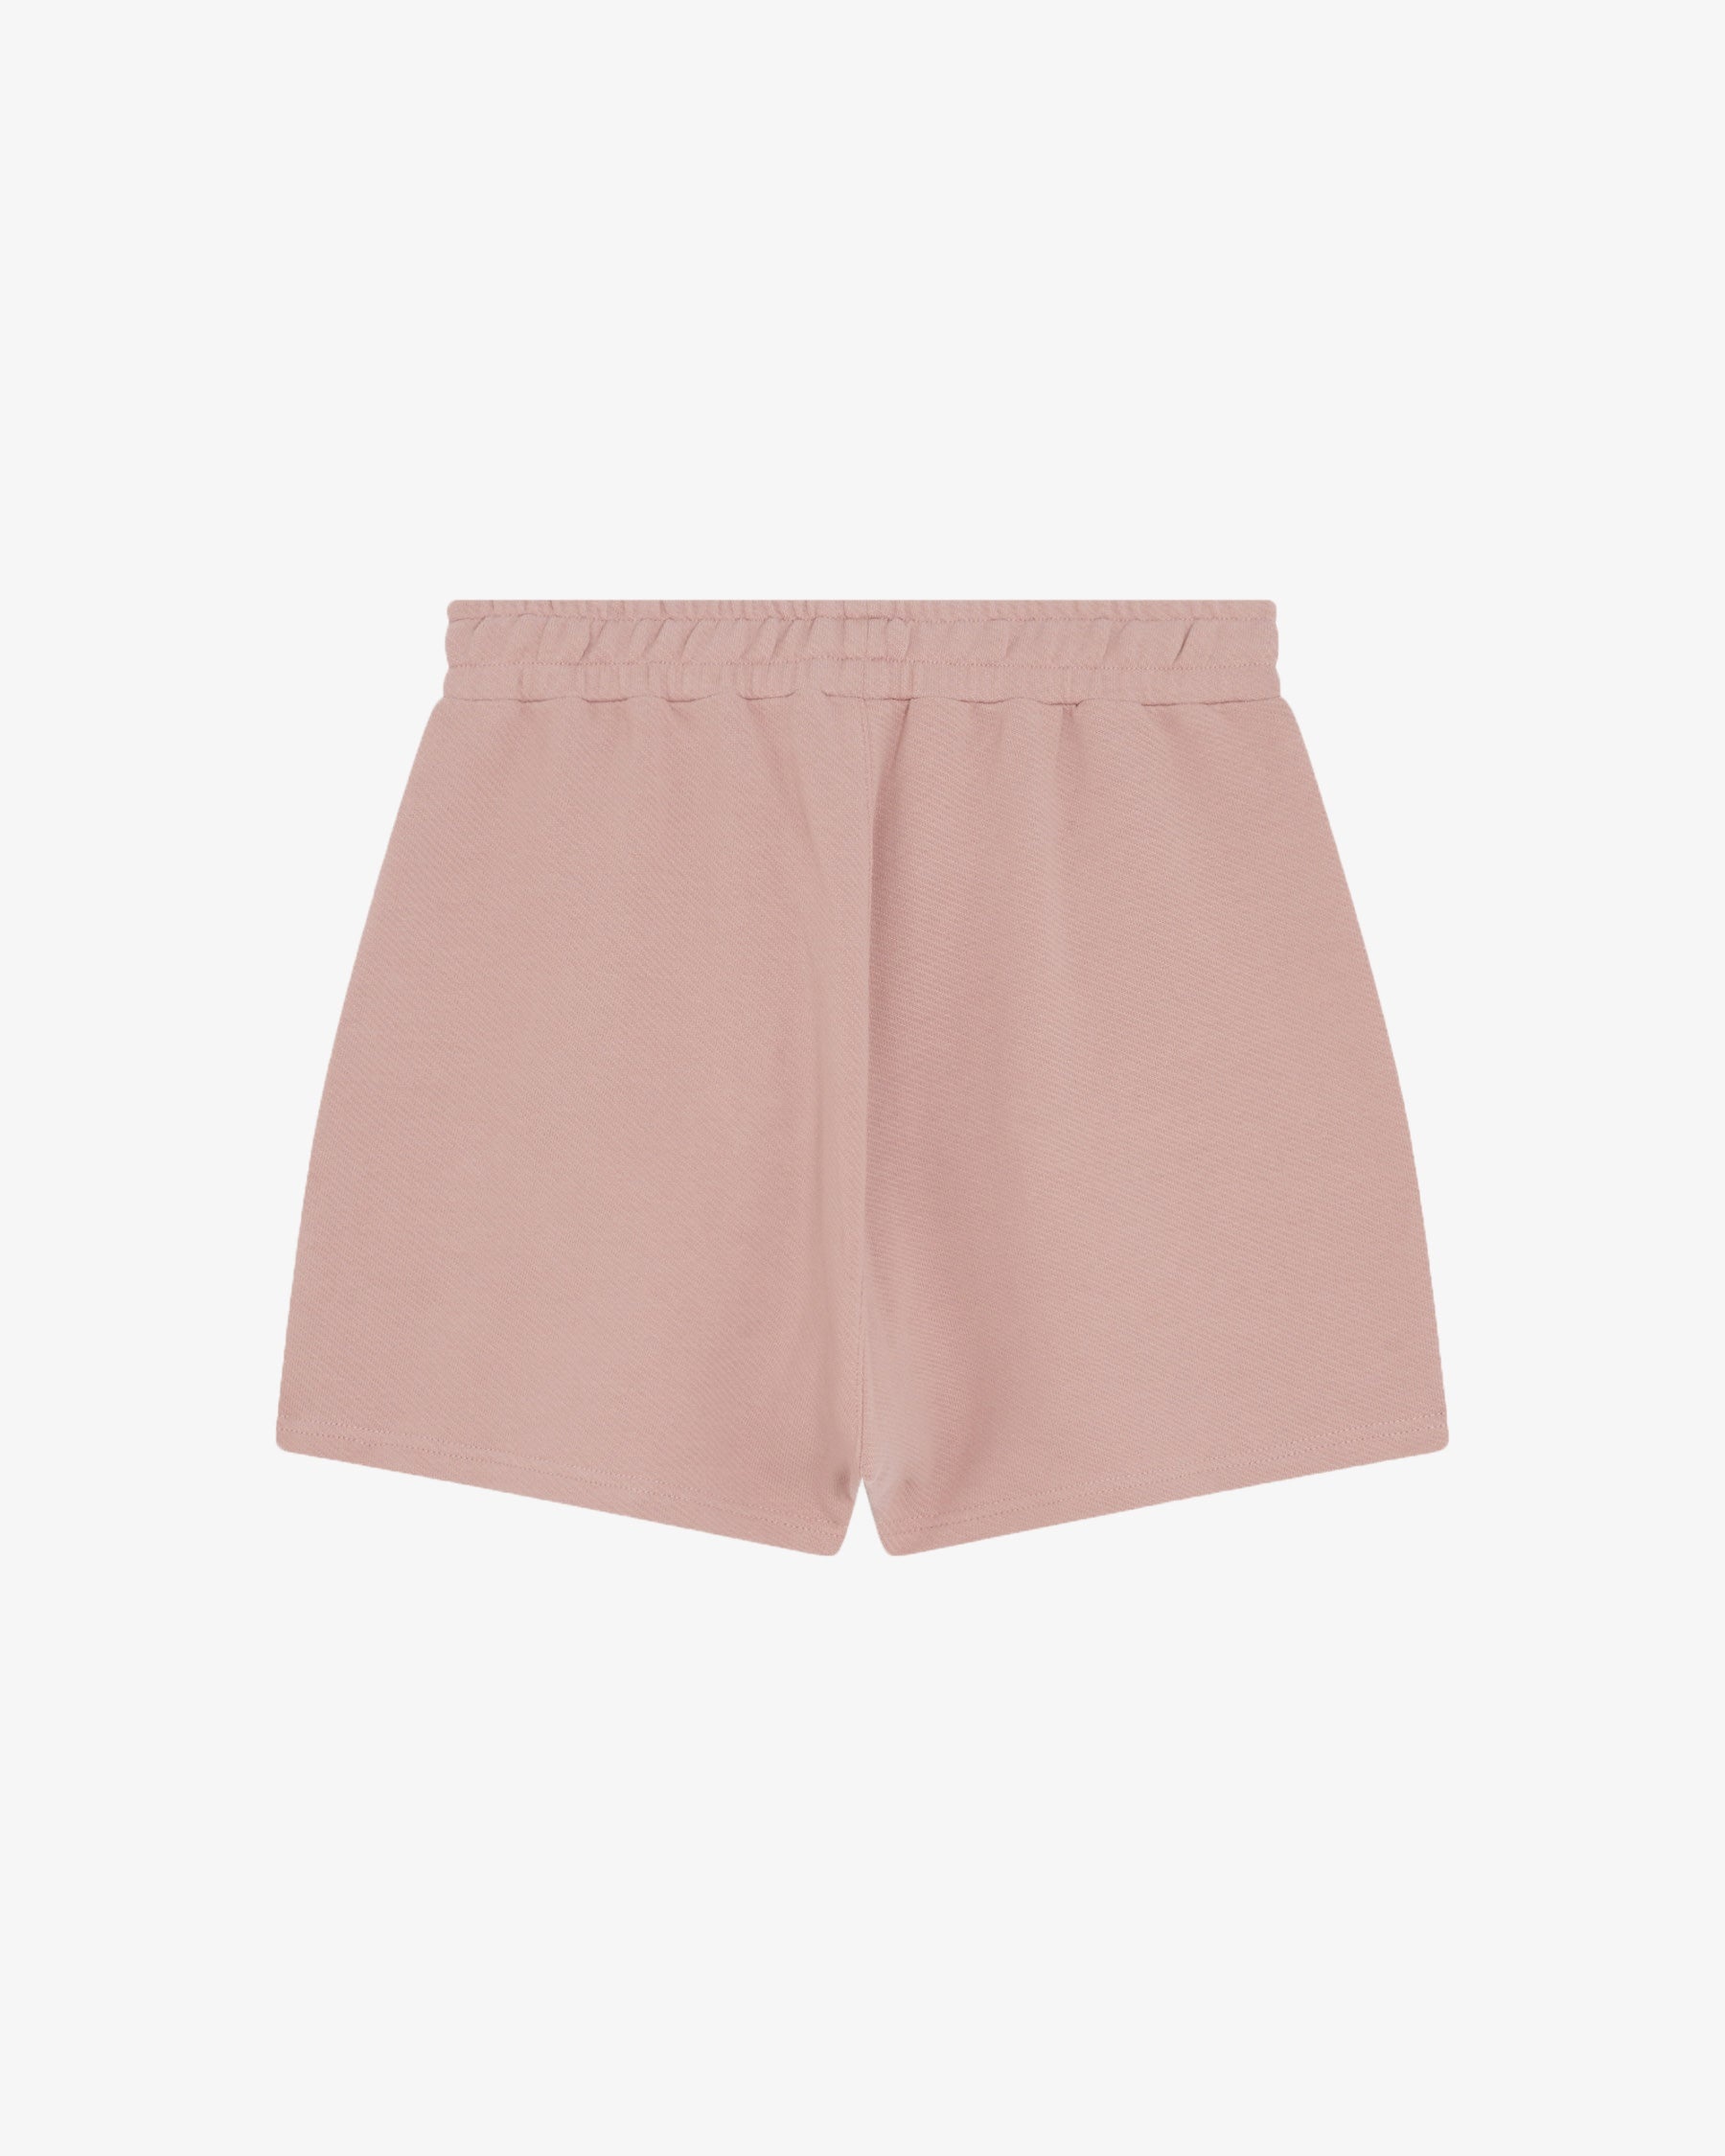 FRENCH TERRY SHORTS - 2